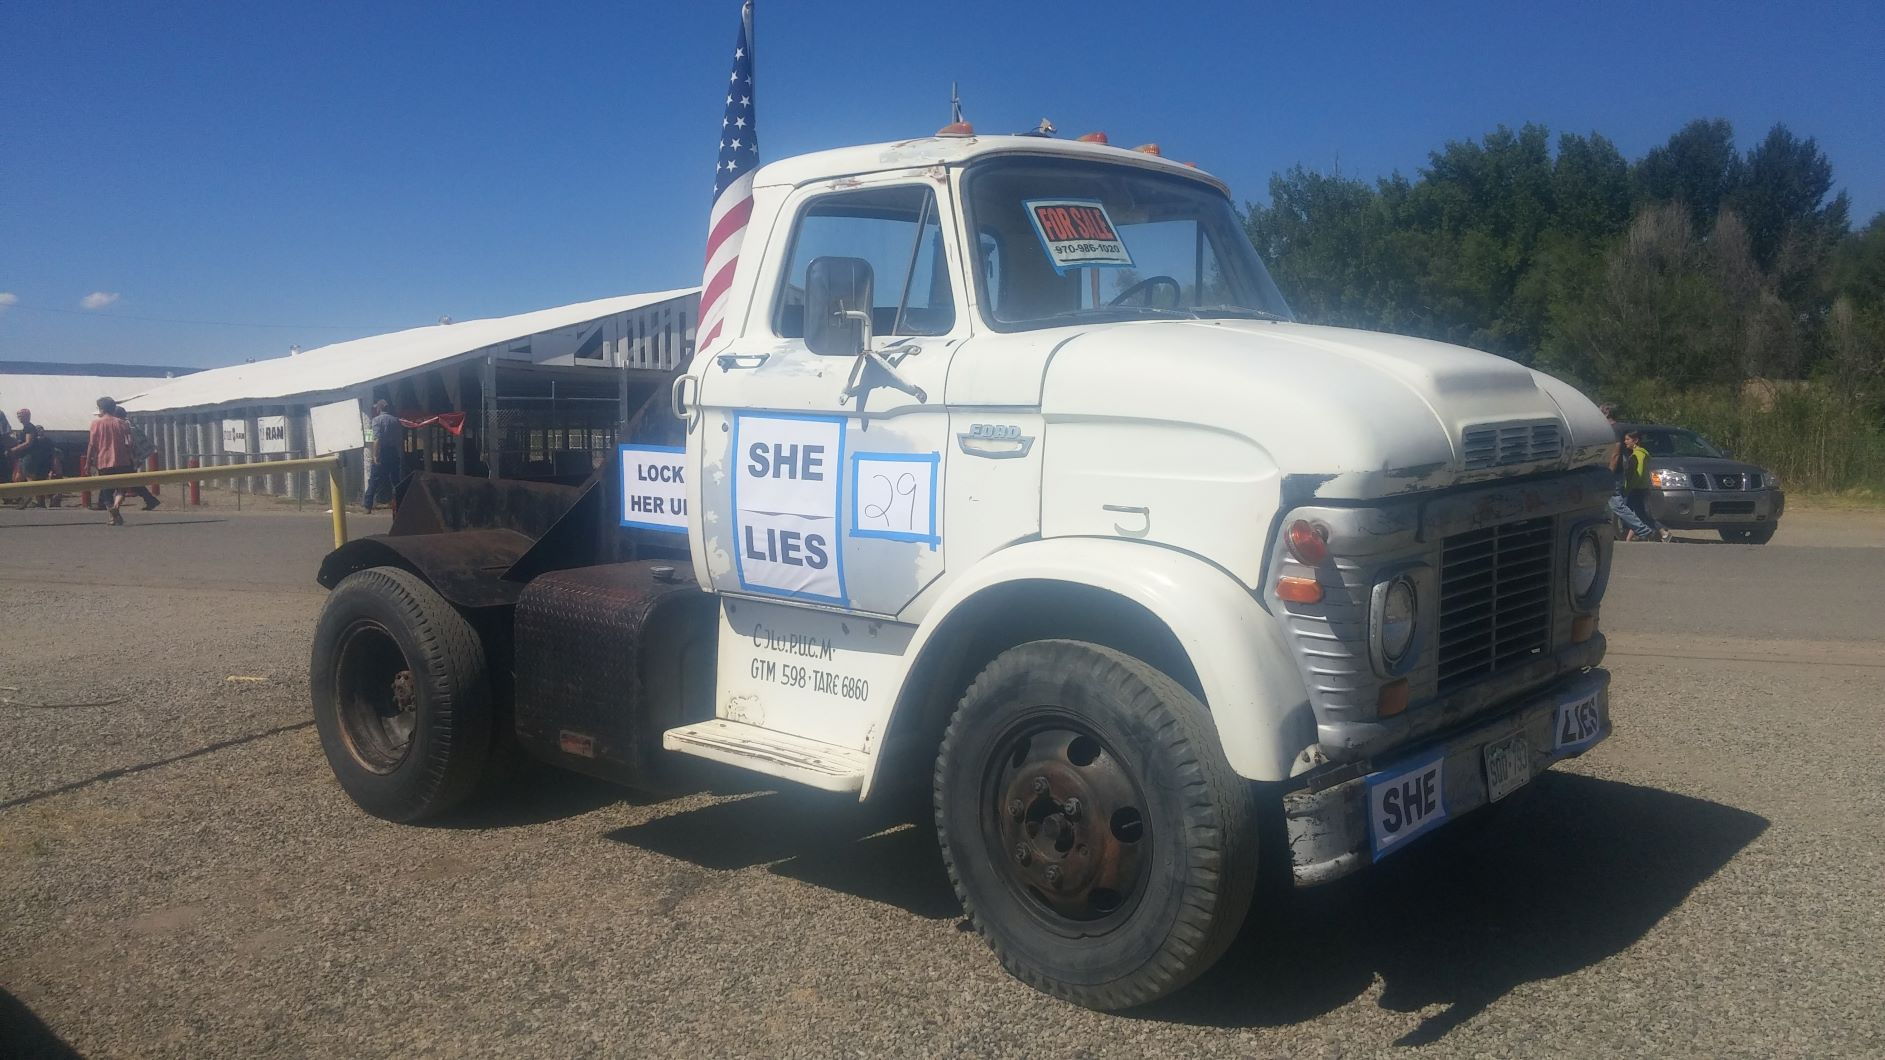 1965 Ford Ranch Wagon - Wife wants it GONE! - 1965 Ford N500 Trailer Toter For Sale - Make an Offer - Used - VIN N50AU699084 - 8 cyl - 4WD - Manual - Truck - White - Paonia, CO 81428, United States